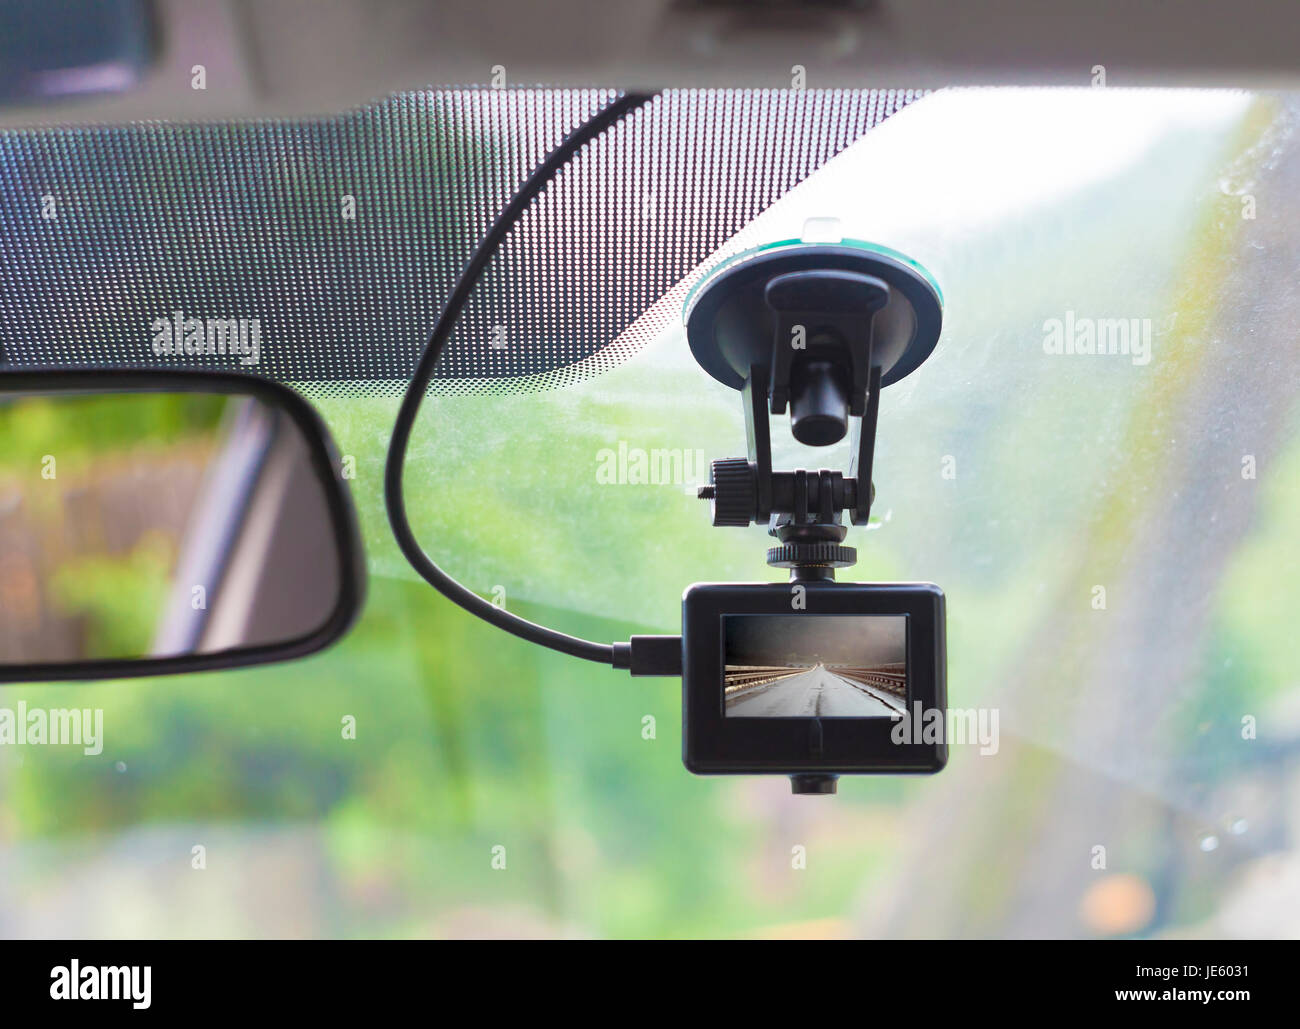 https://c8.alamy.com/comp/JE6031/dvr-camera-on-car-windshield-with-view-of-the-road-JE6031.jpg